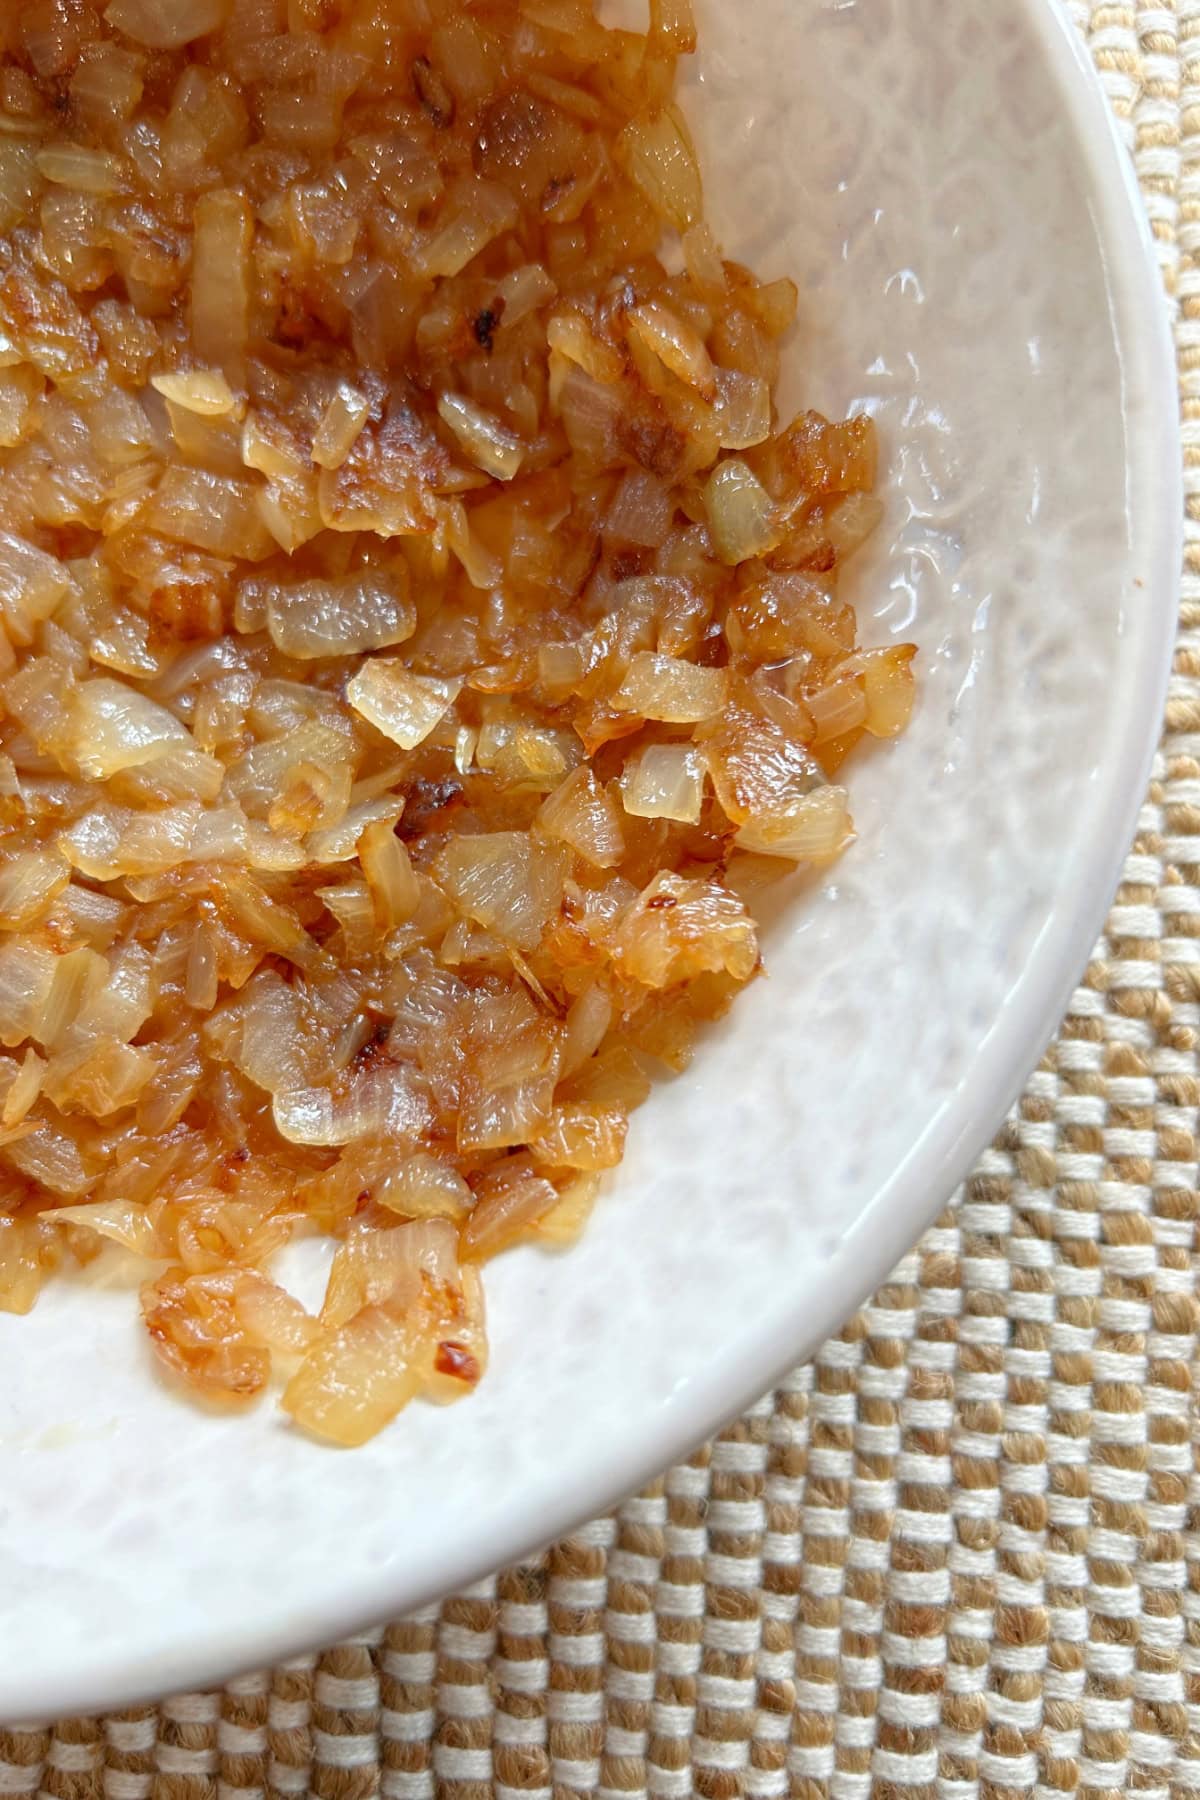 bowl of caramelized onions